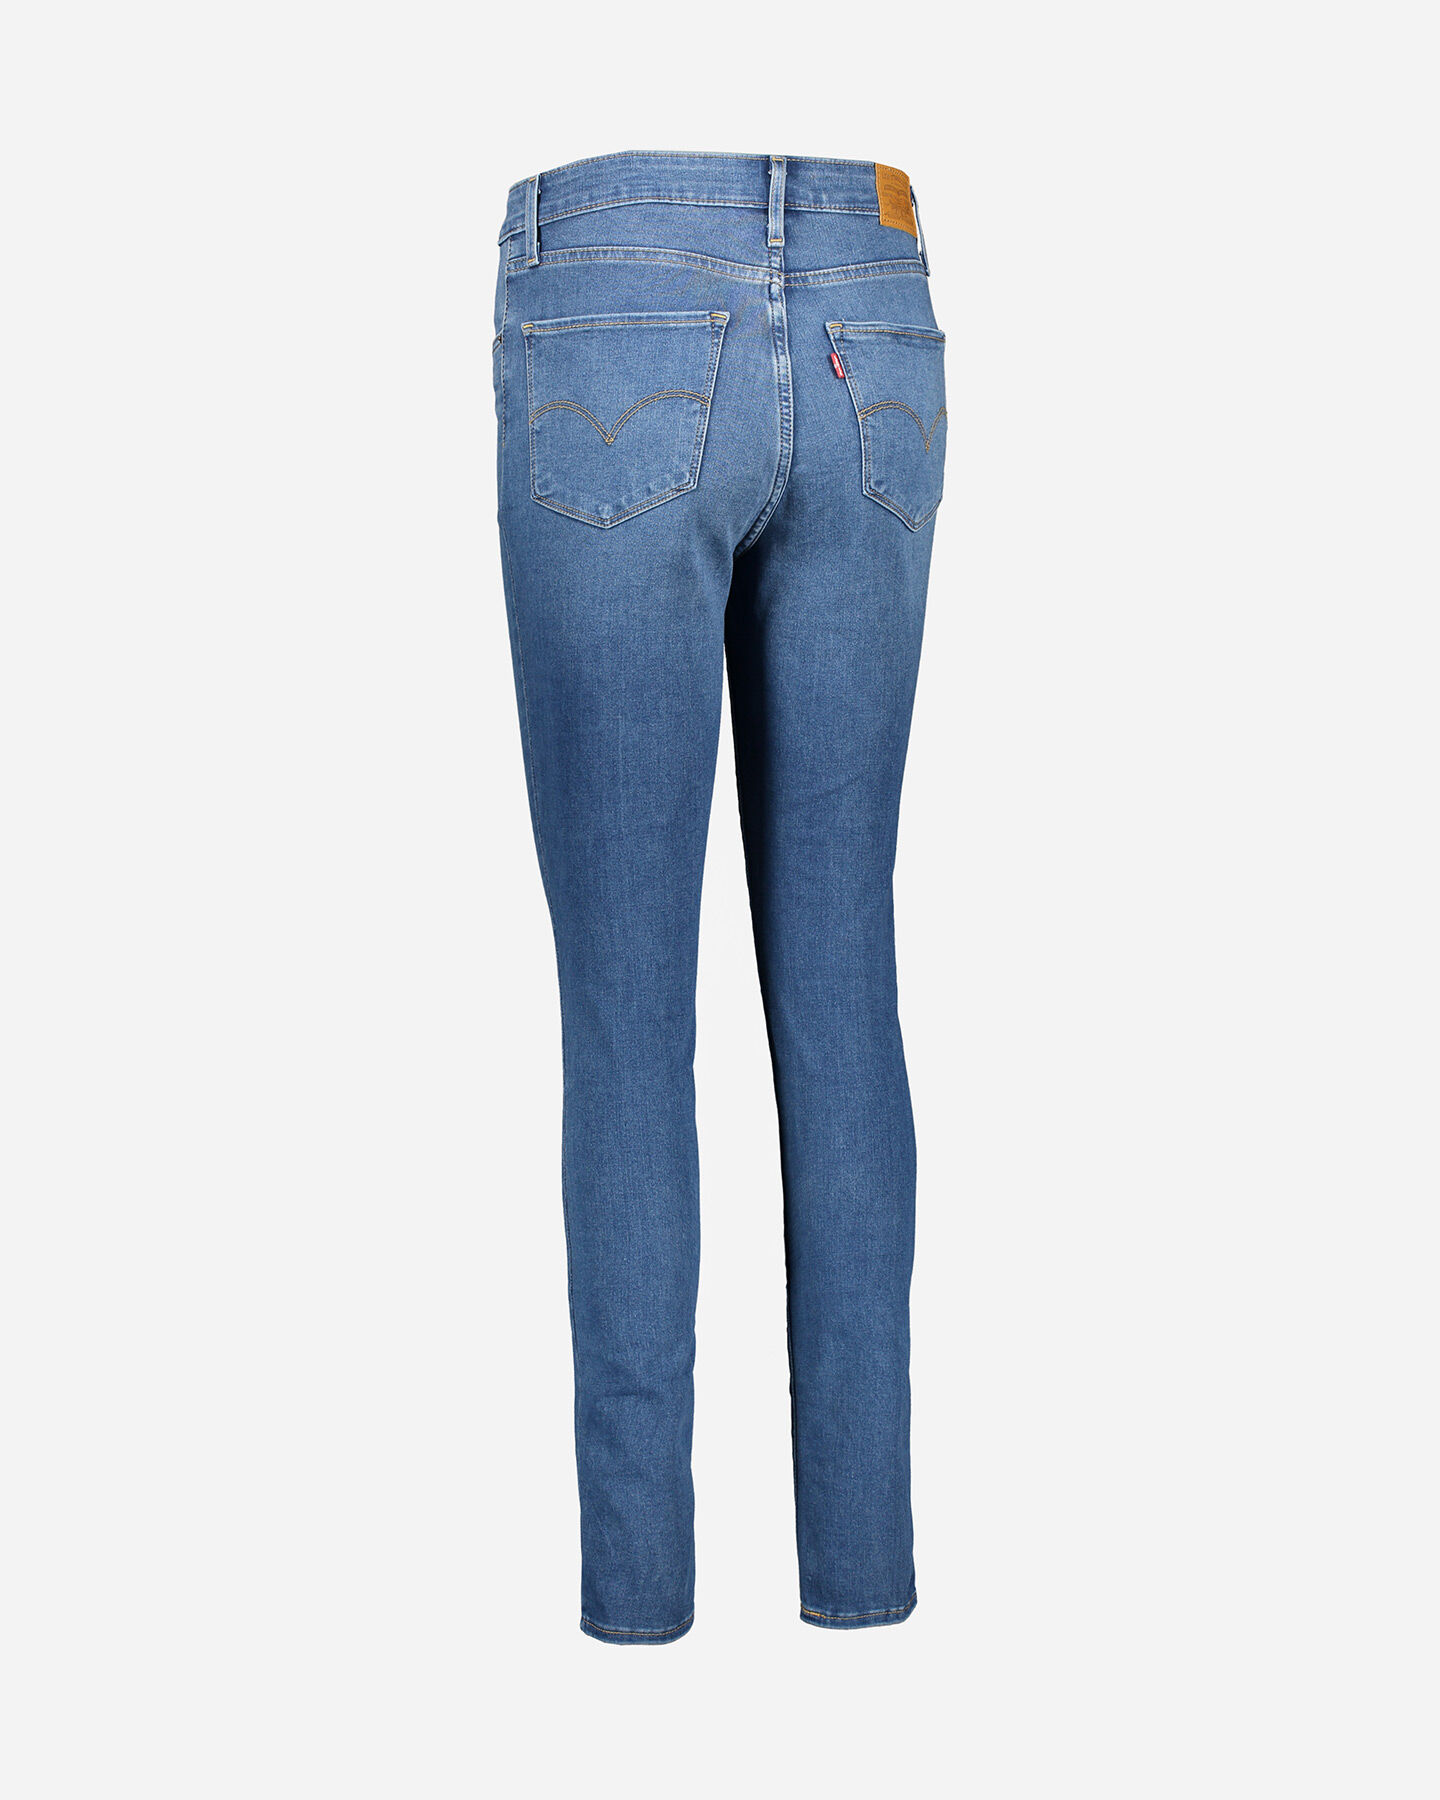  Jeans LEVI'S 721 HIGH RISE SKINNY W S4077782|0293|26 scatto 5